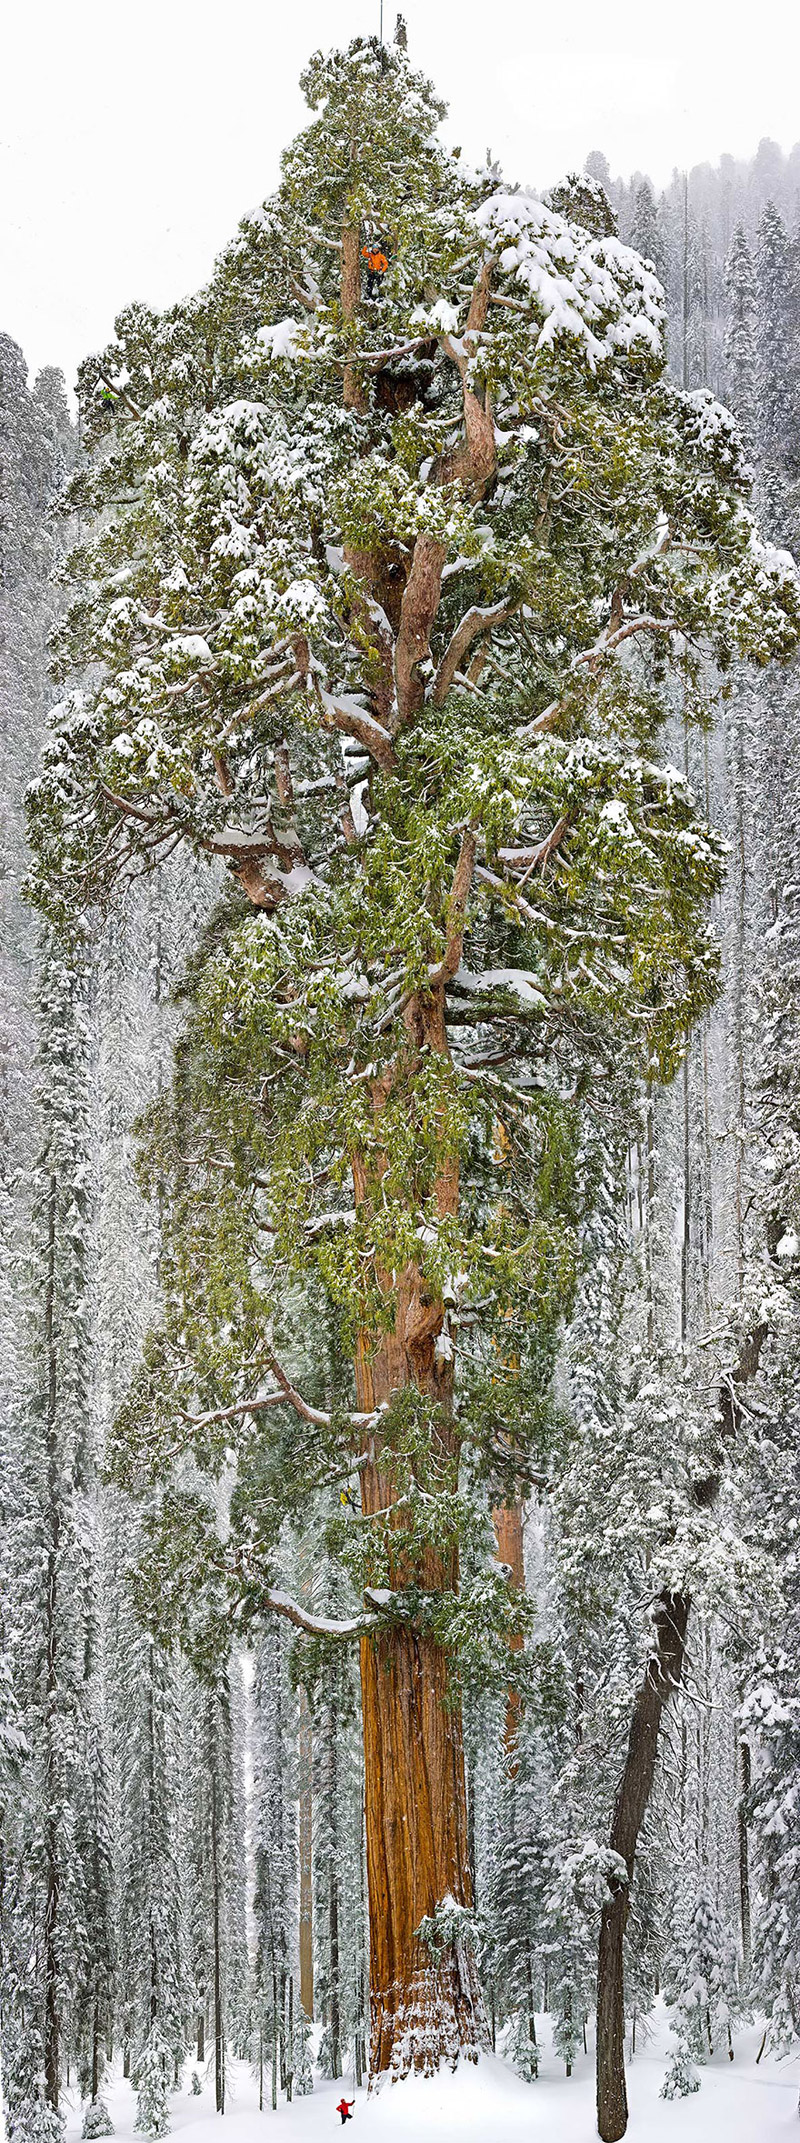 The President, Third-Largest Giant Sequoia Tree In The World, California